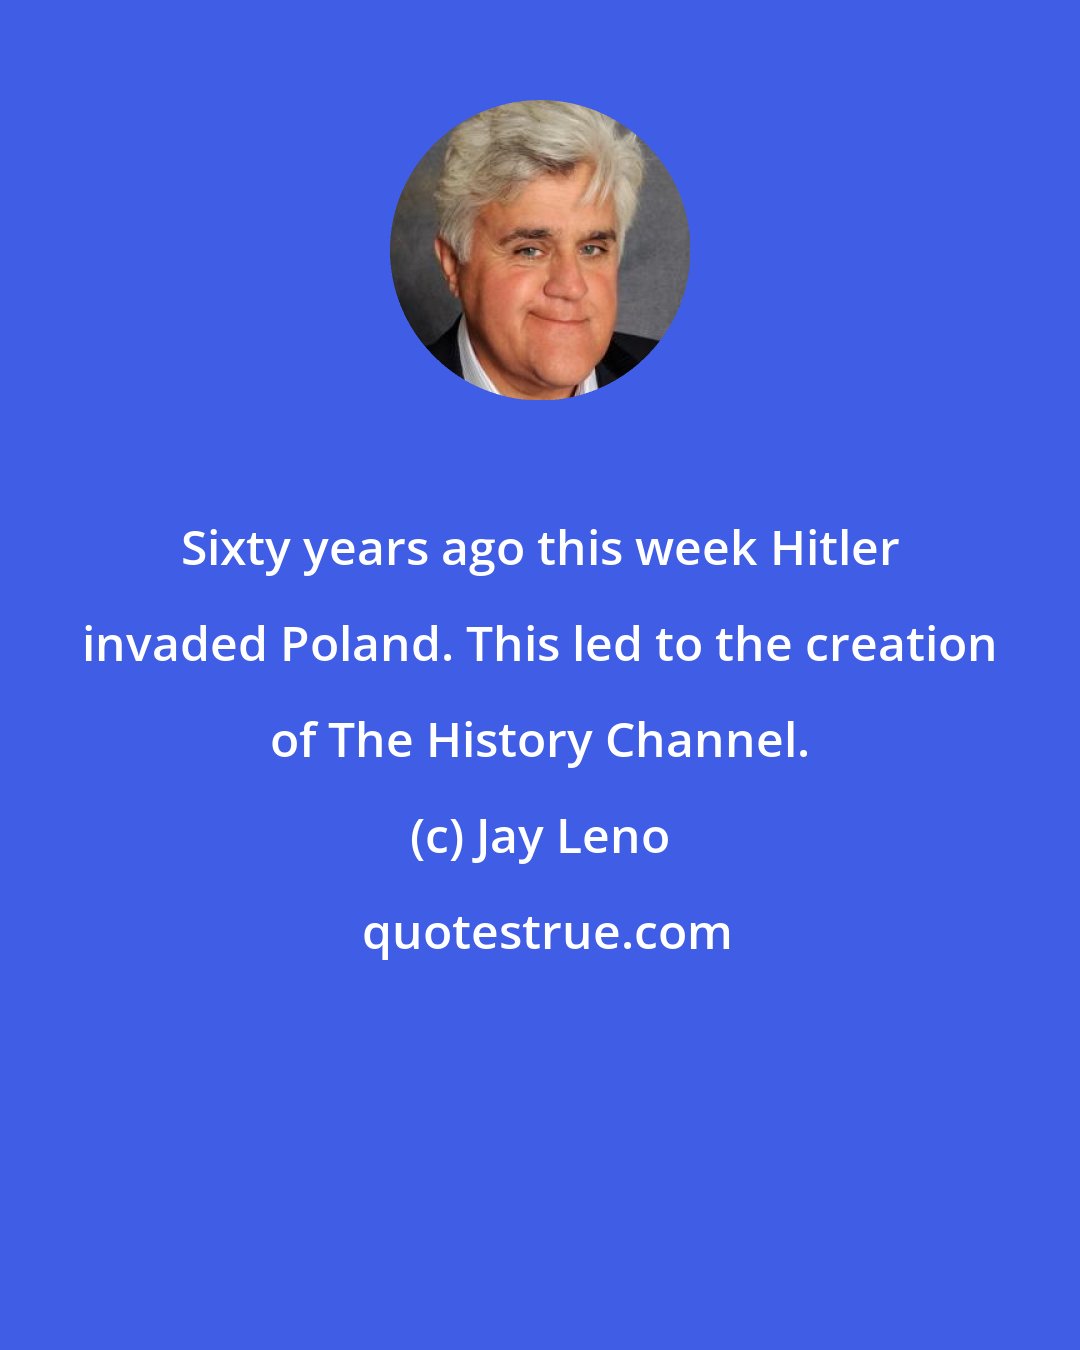 Jay Leno: Sixty years ago this week Hitler invaded Poland. This led to the creation of The History Channel.